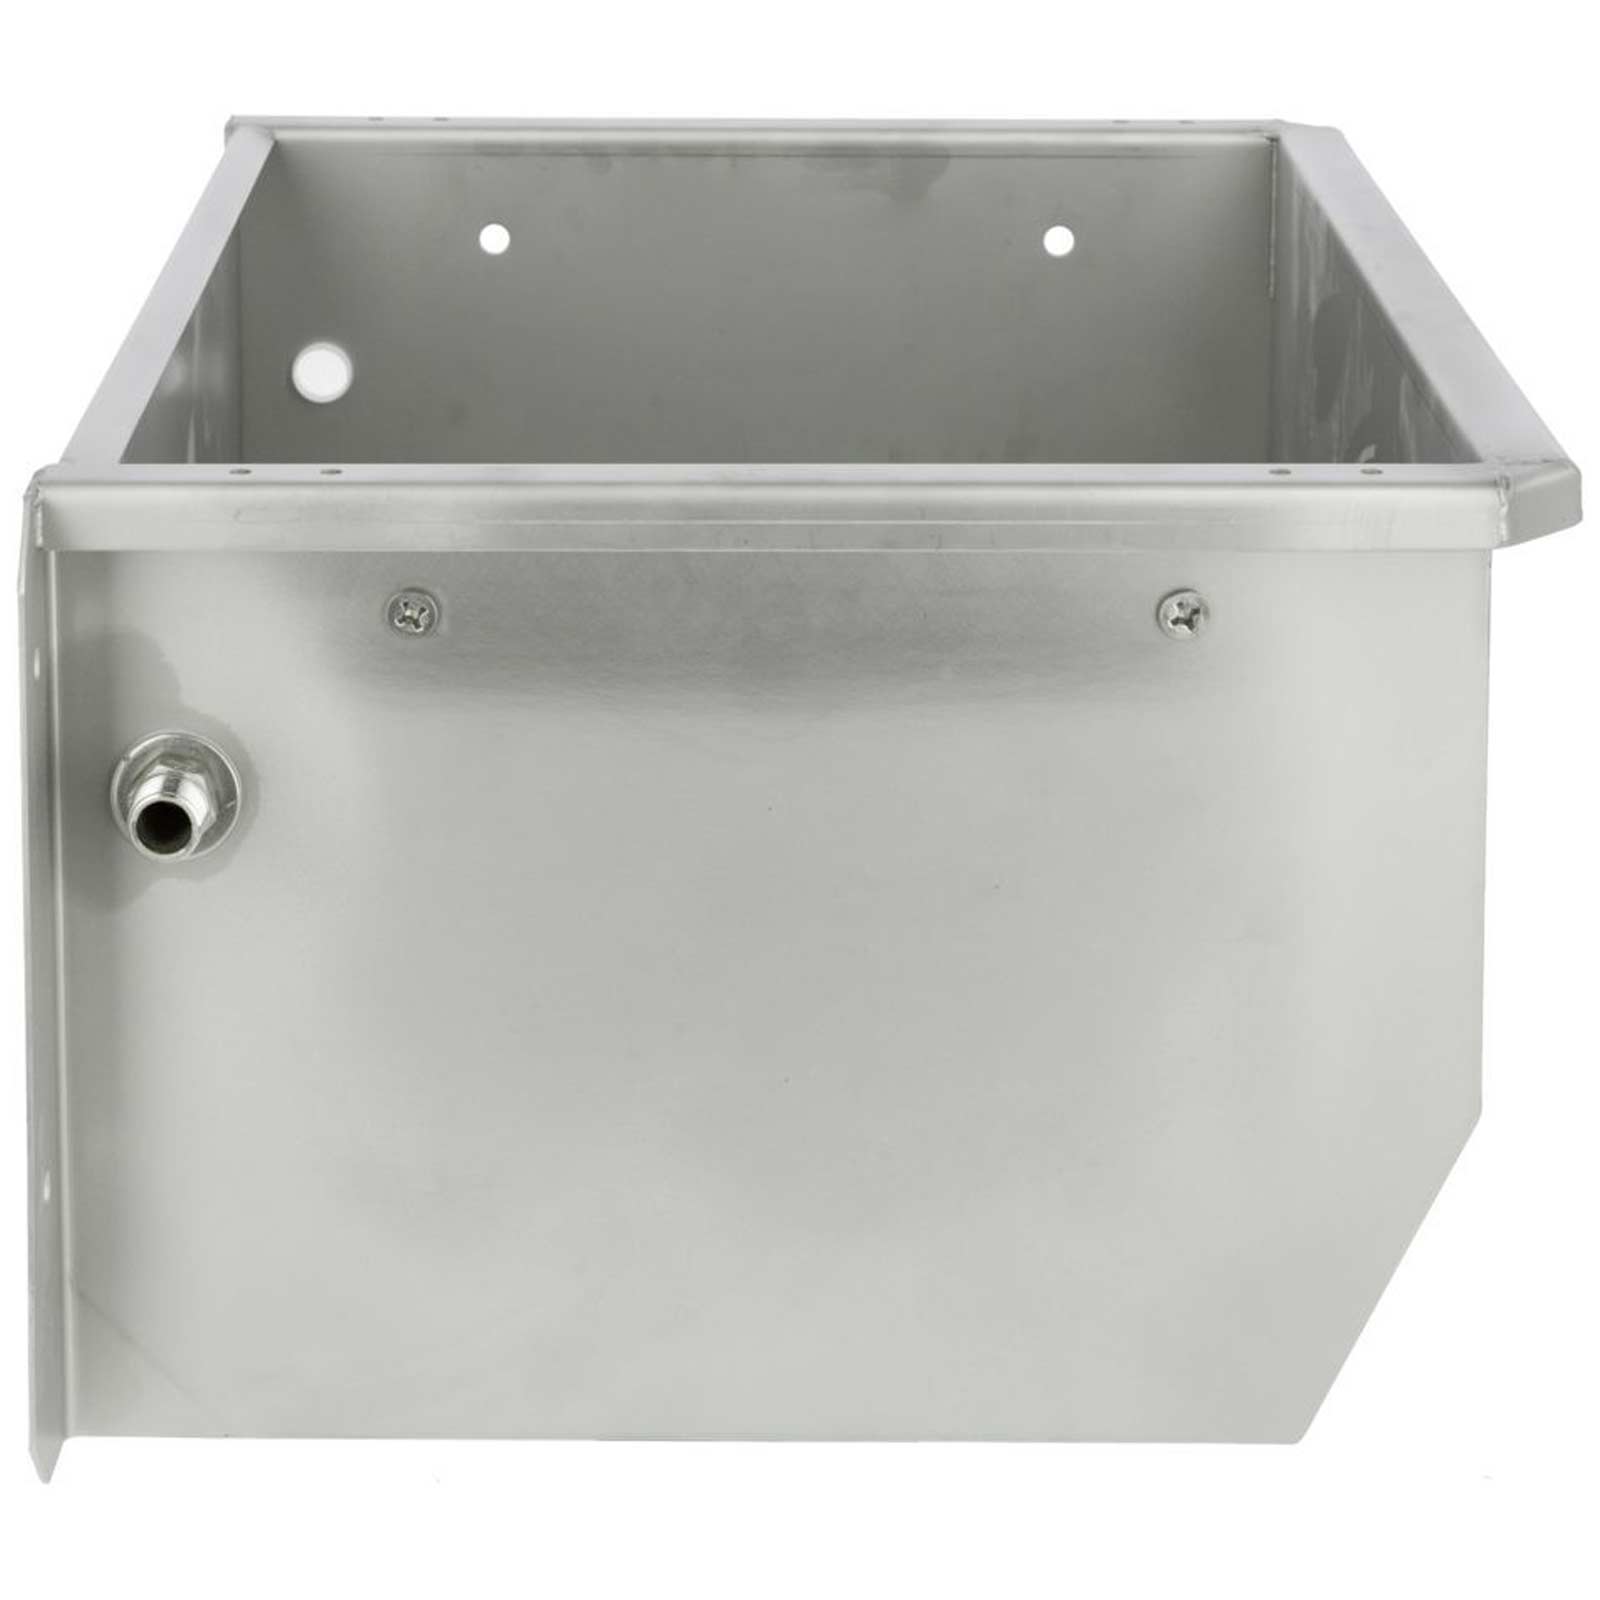 Trough drinker stainless steel 60 x 42,5 x 29 cm 35 L Without heating